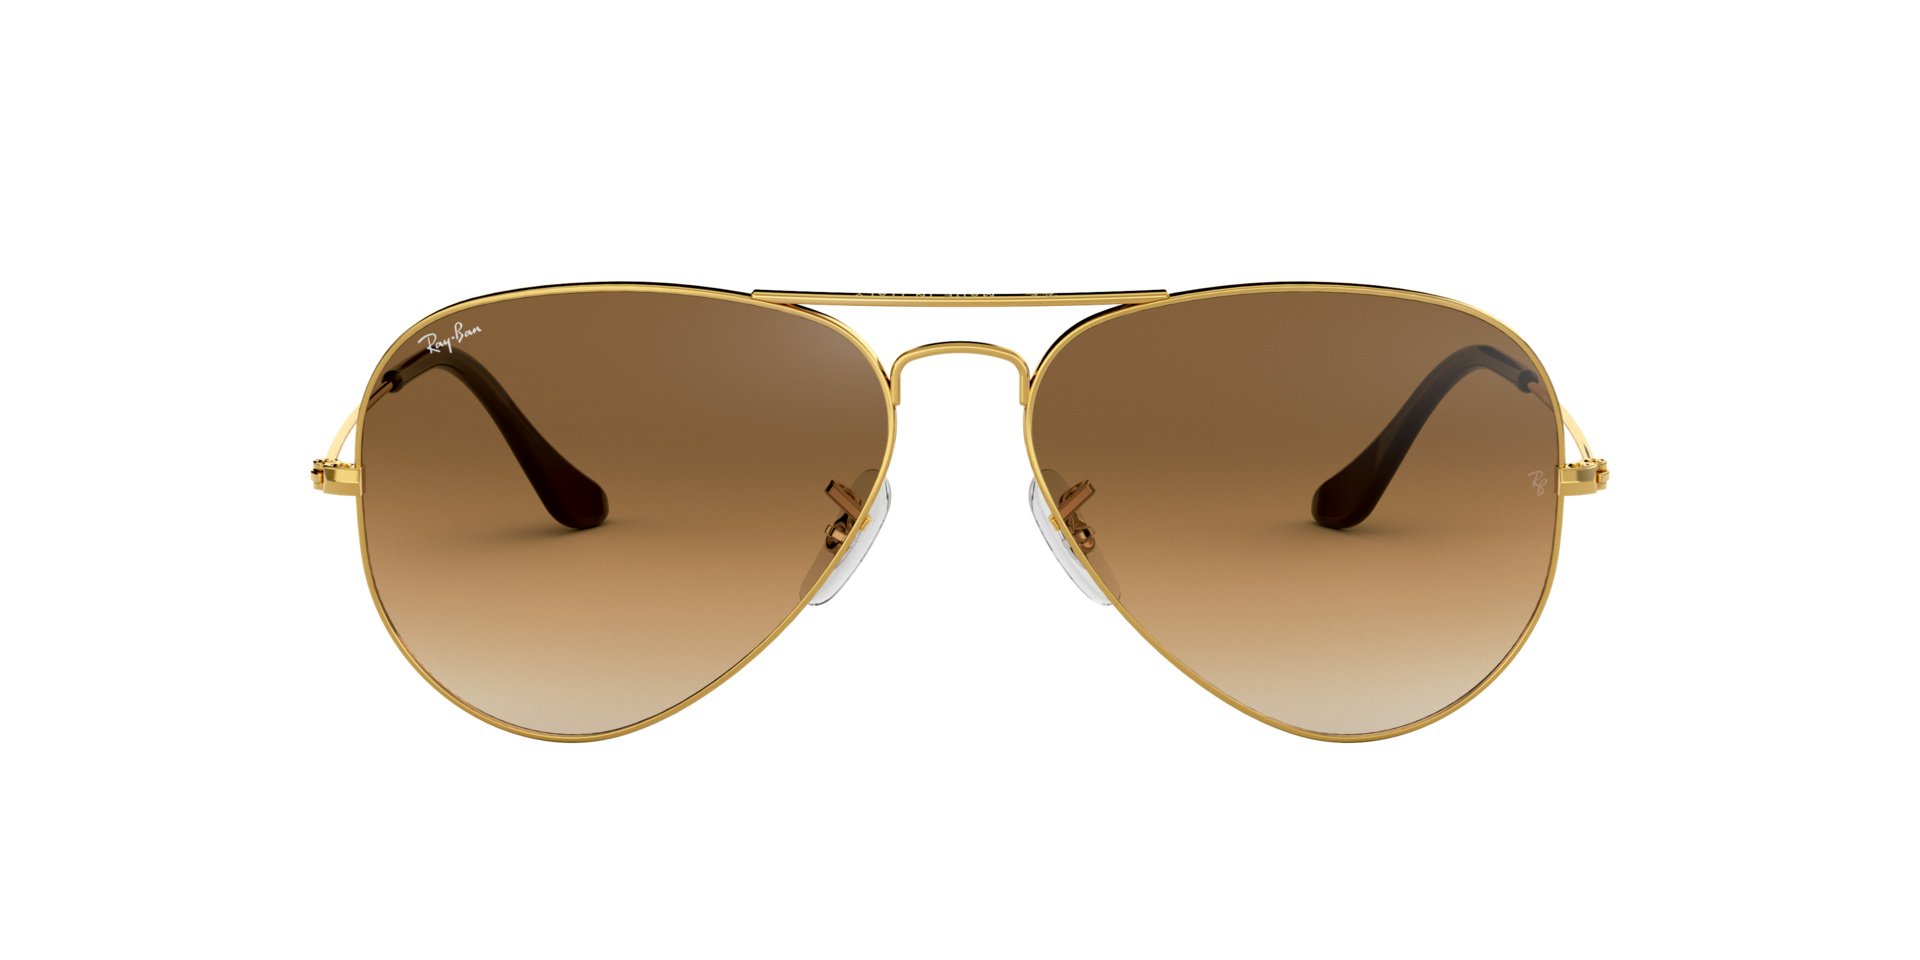 Ray Ban Aviator Large Metal Sonnenbrille RB3025 001/51 62